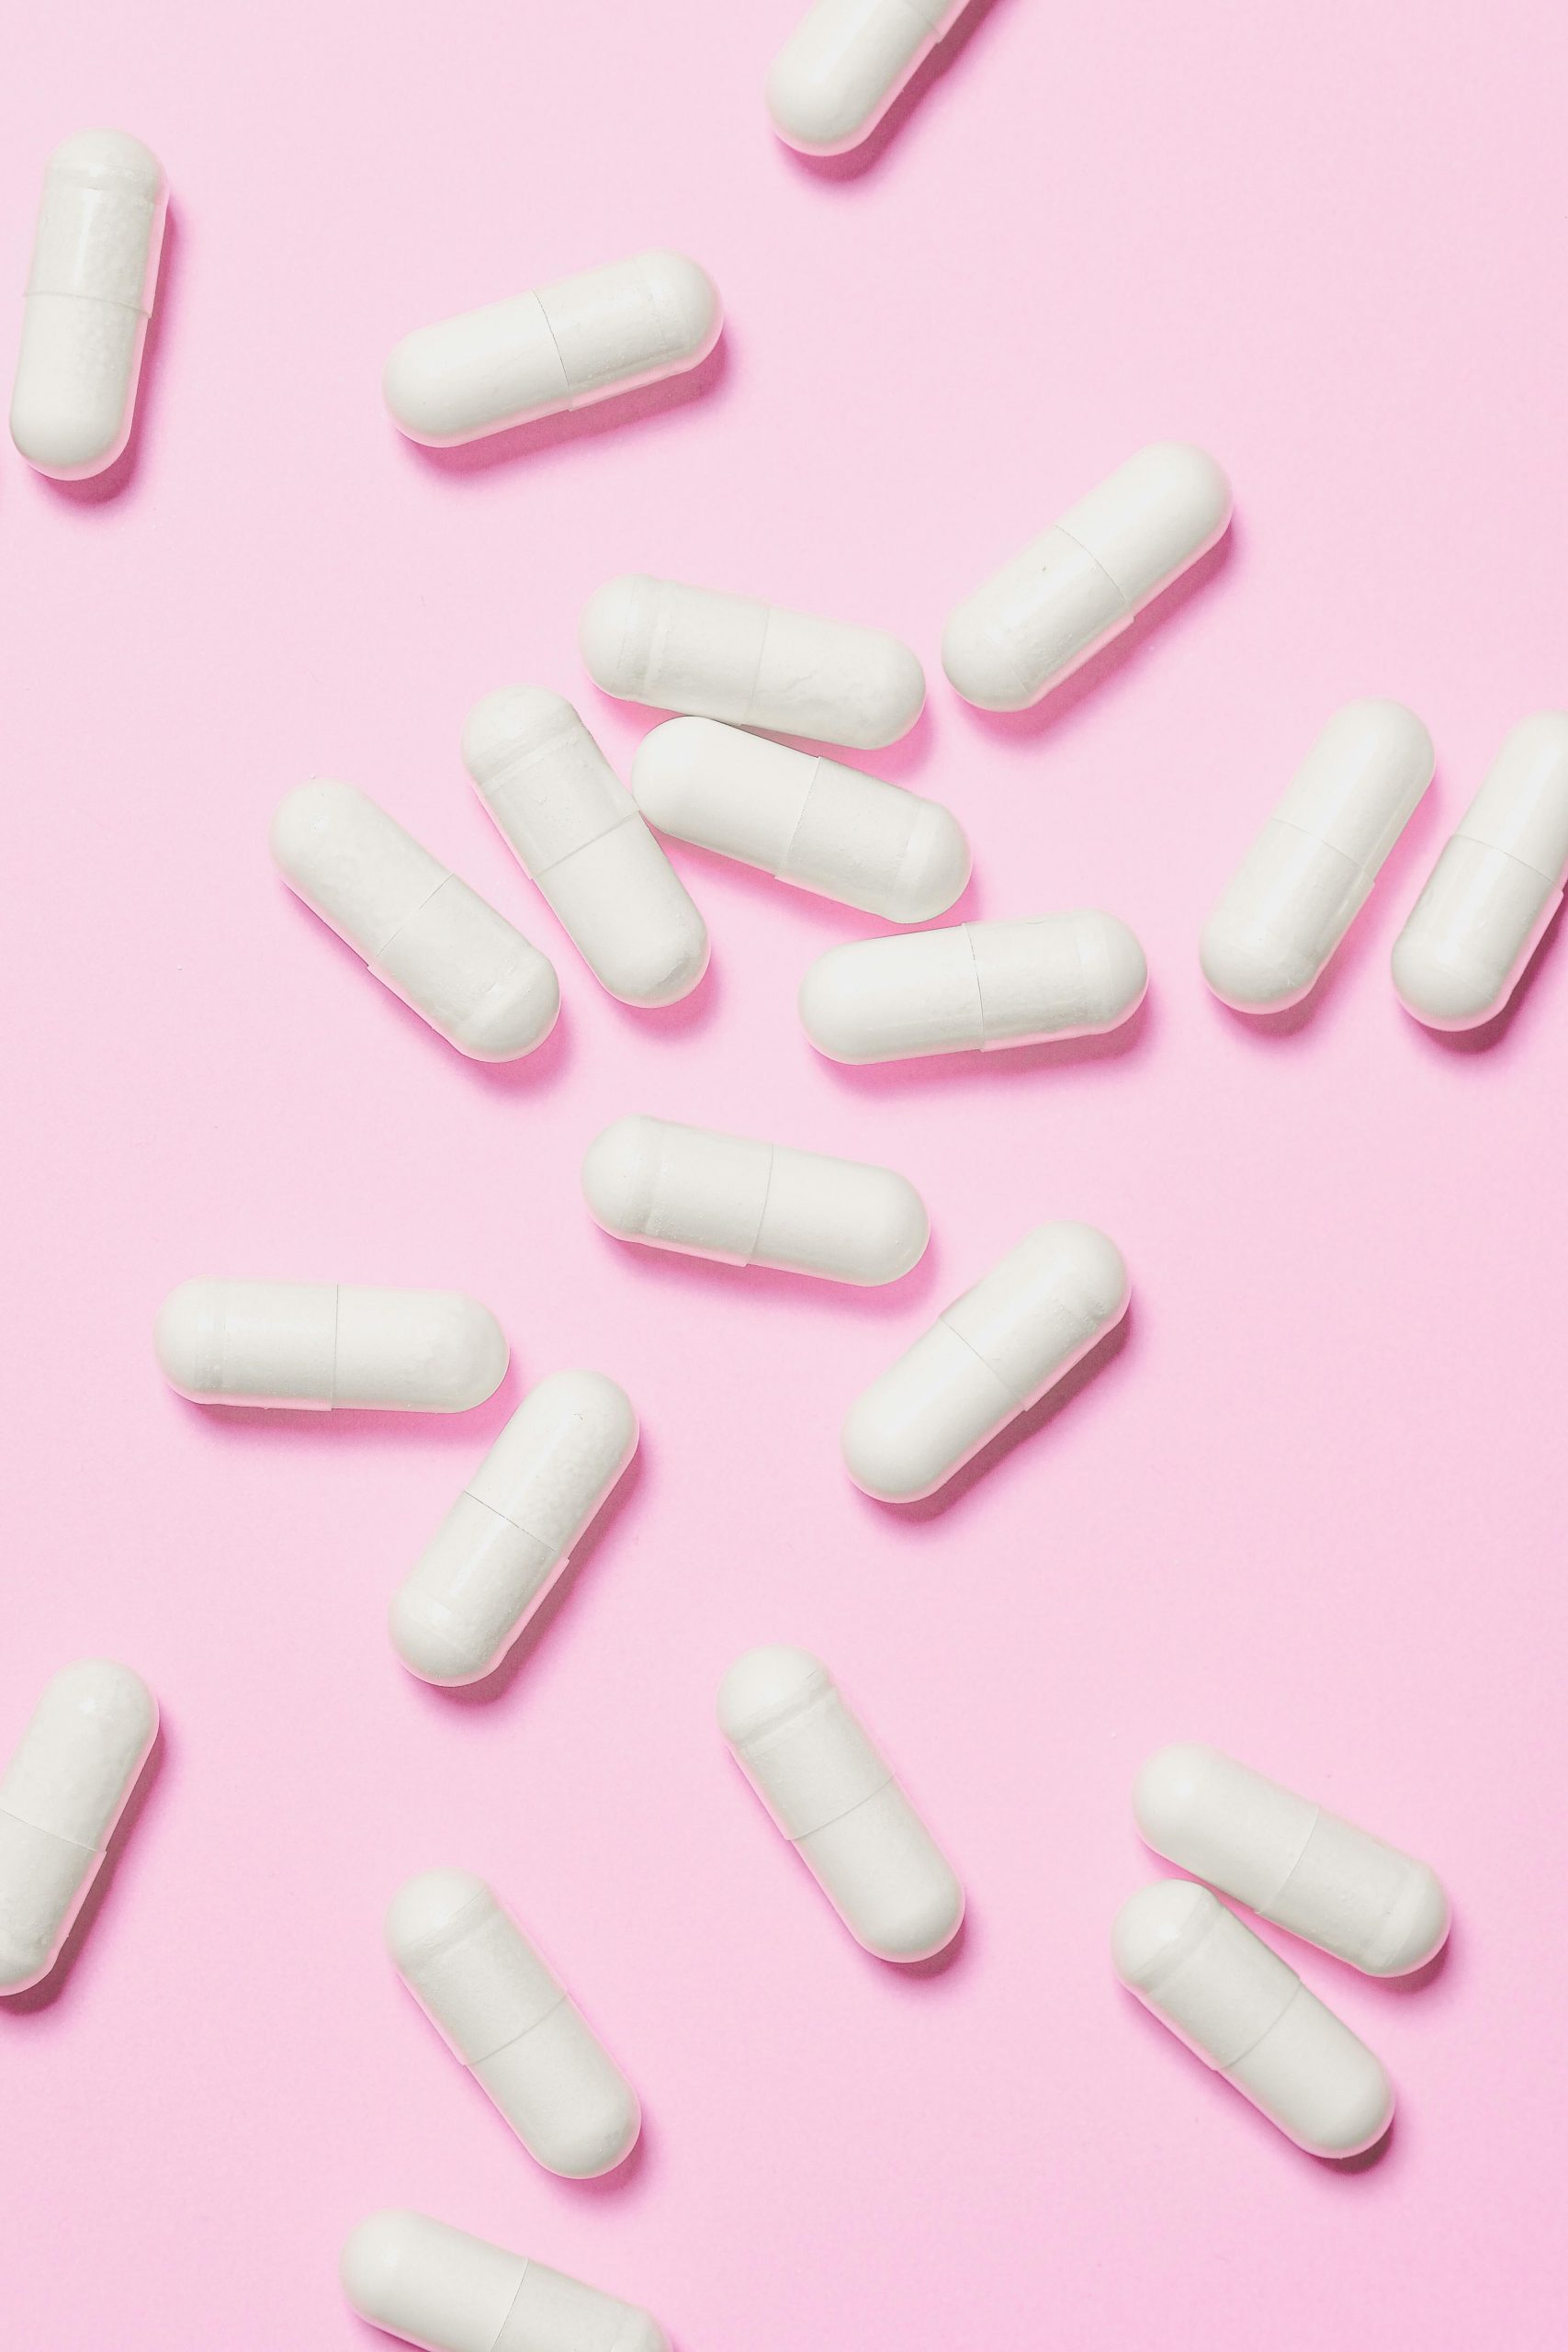 Supplements to Strengthen Your Immune System: